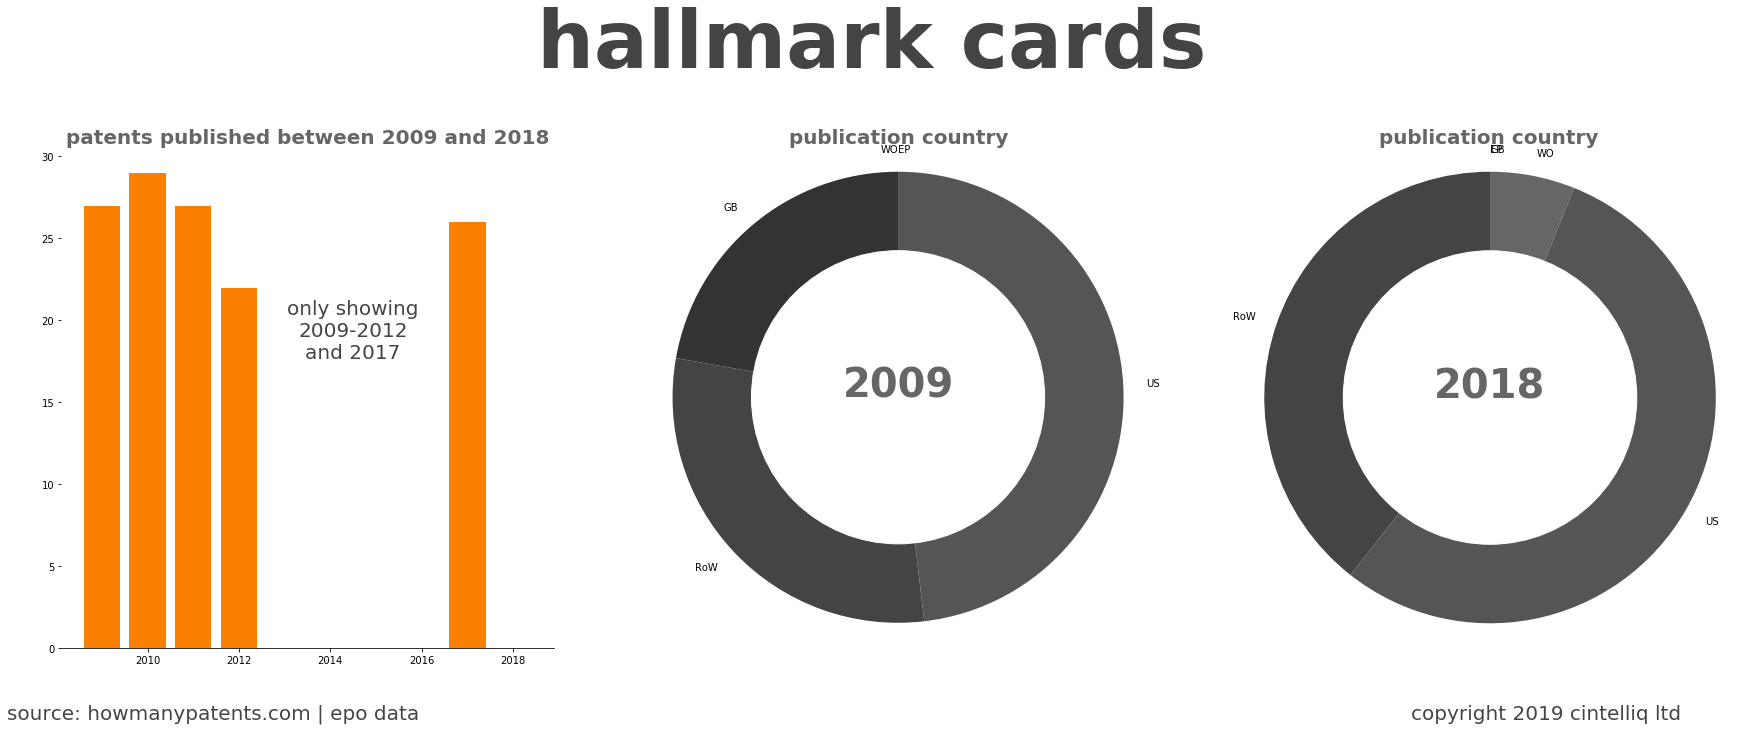 summary of patents for Hallmark Cards